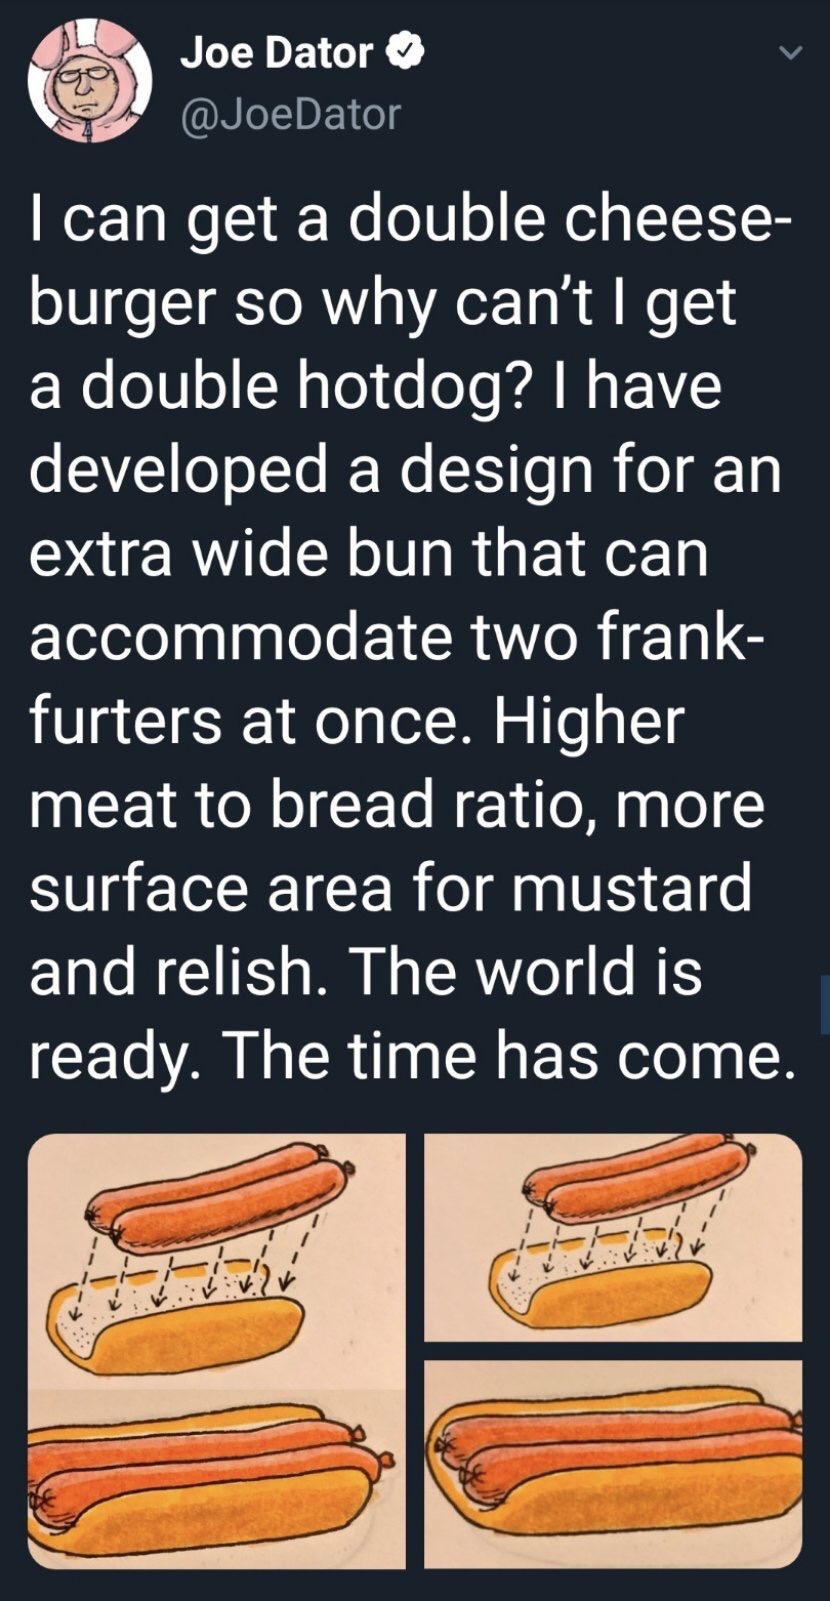 orange - Joe Dator I can get a double cheese burger so why can't I get a double hotdog? I have developed a design for an extra wide bun that can accommodate two frank furters at once. Higher meat to bread ratio, more surface area for mustard and relish. T